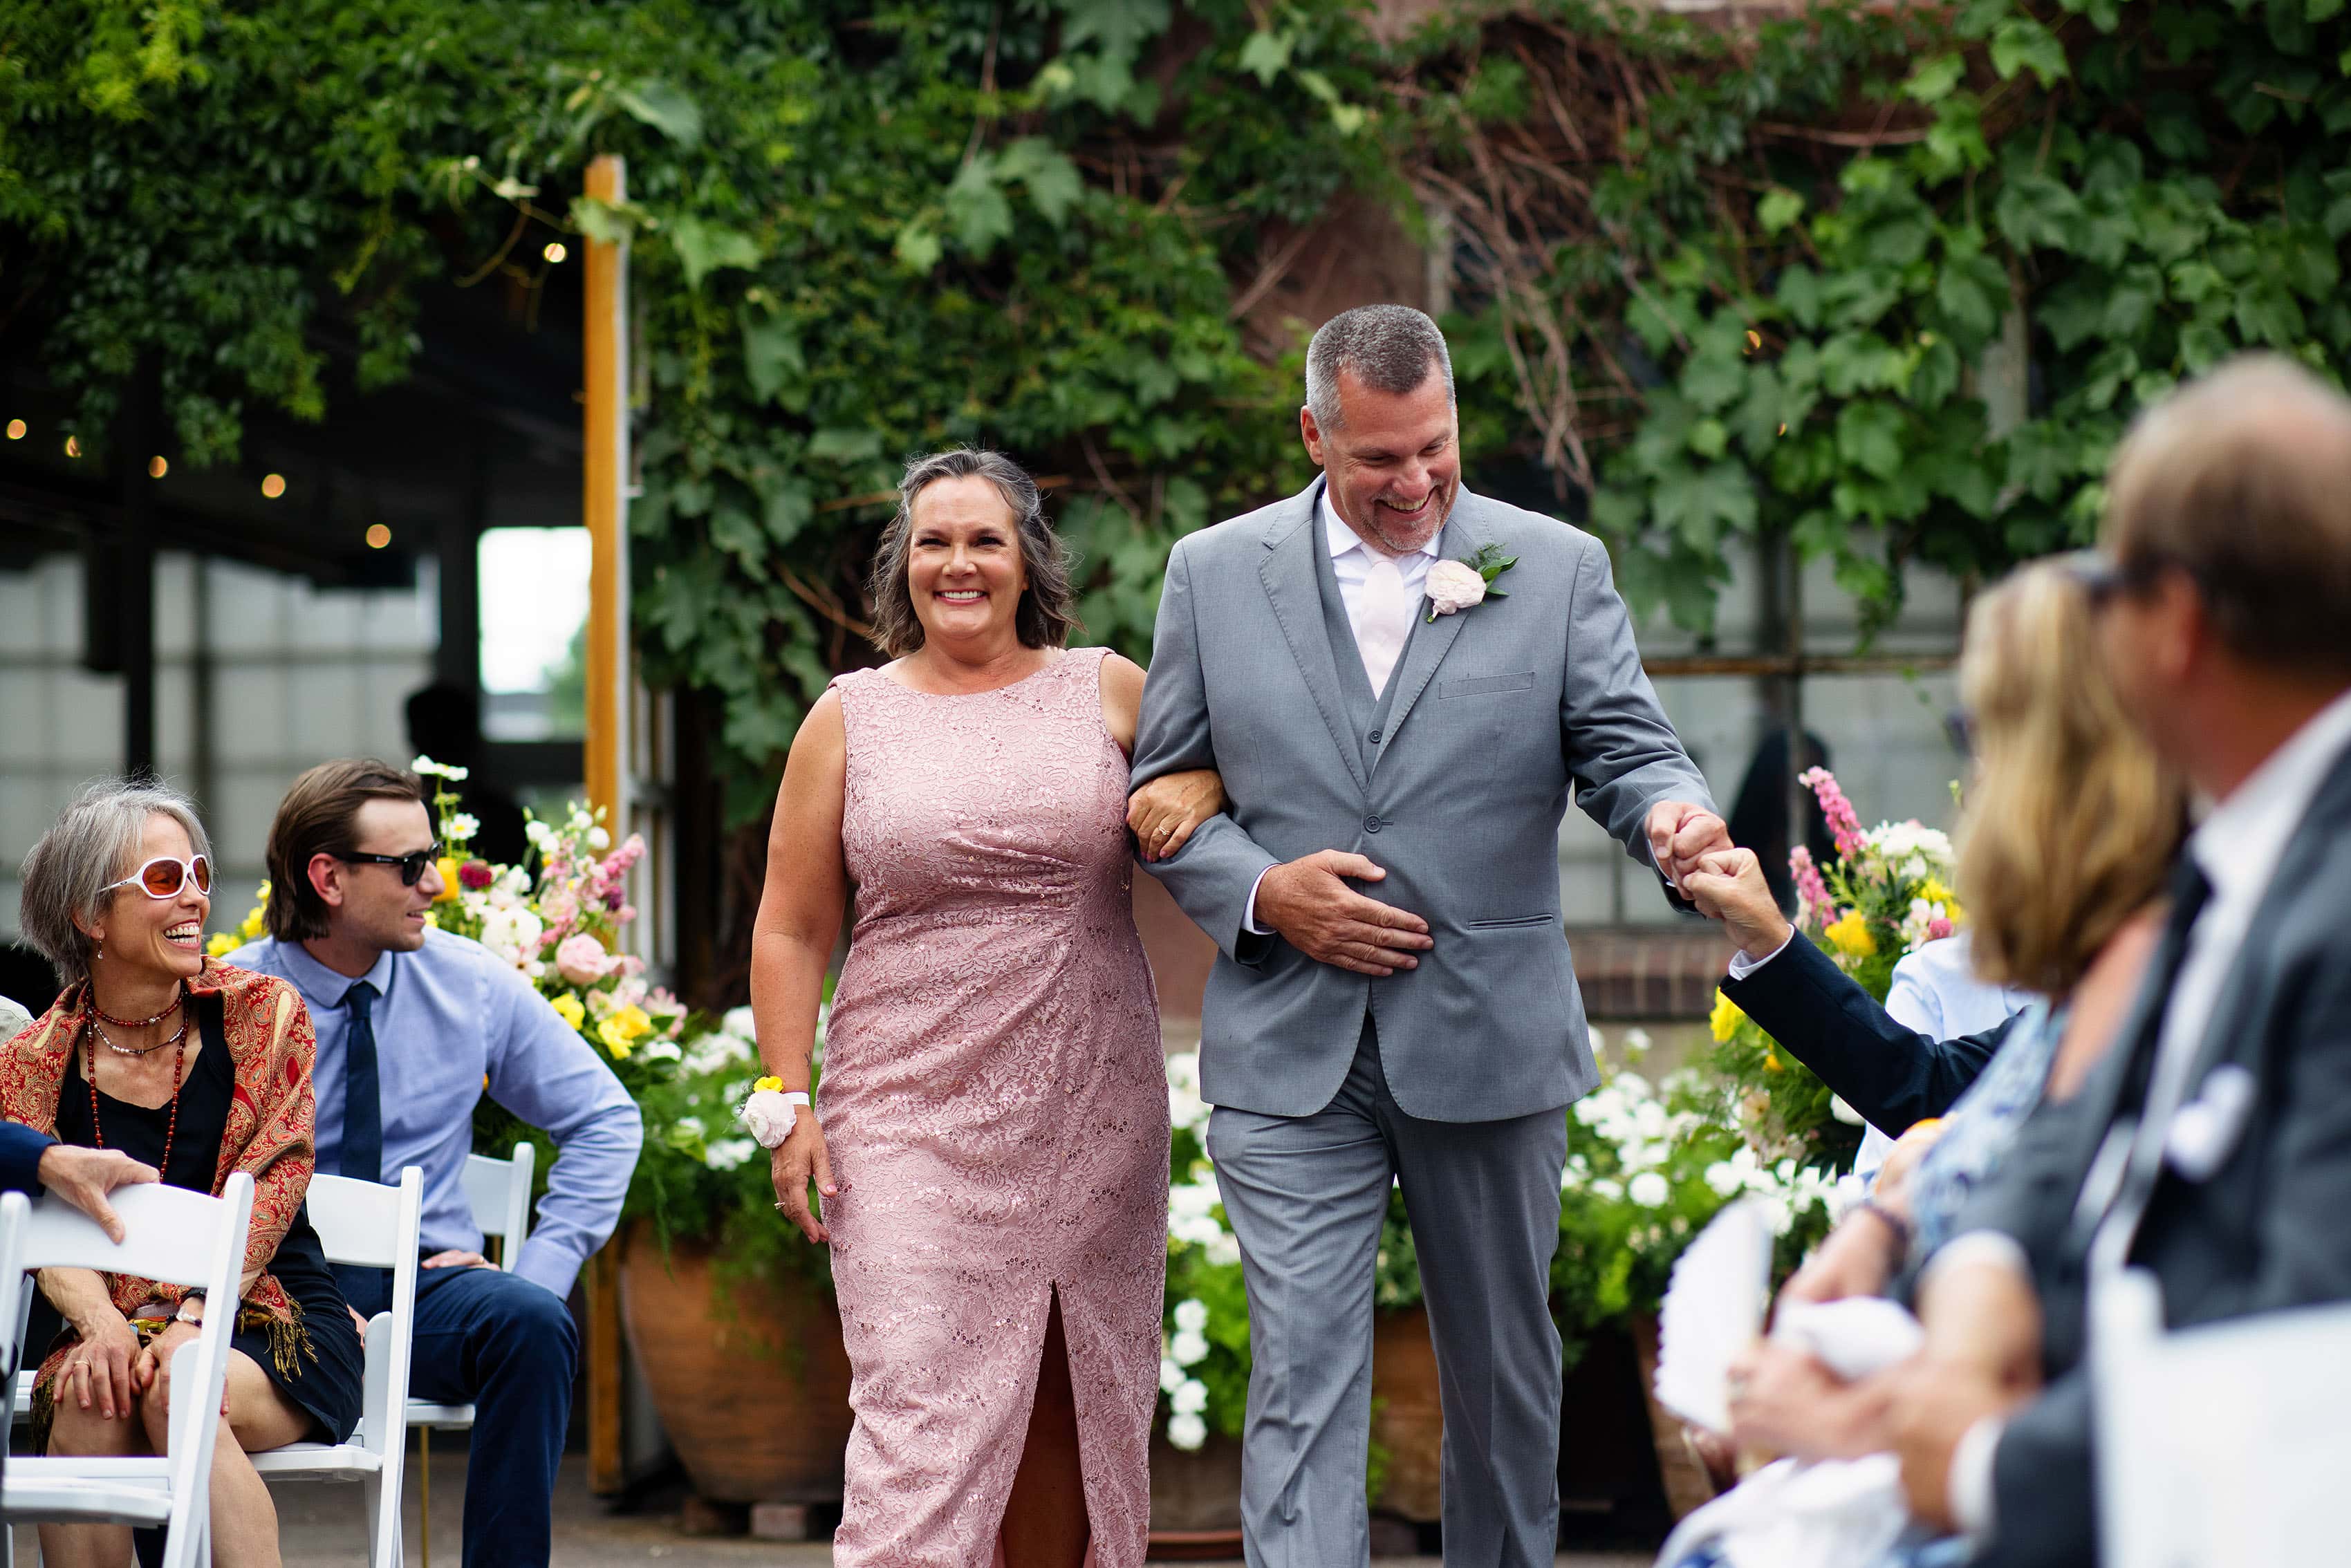 The father of the bride gets a fist bump as he escorts his wife down the aisle